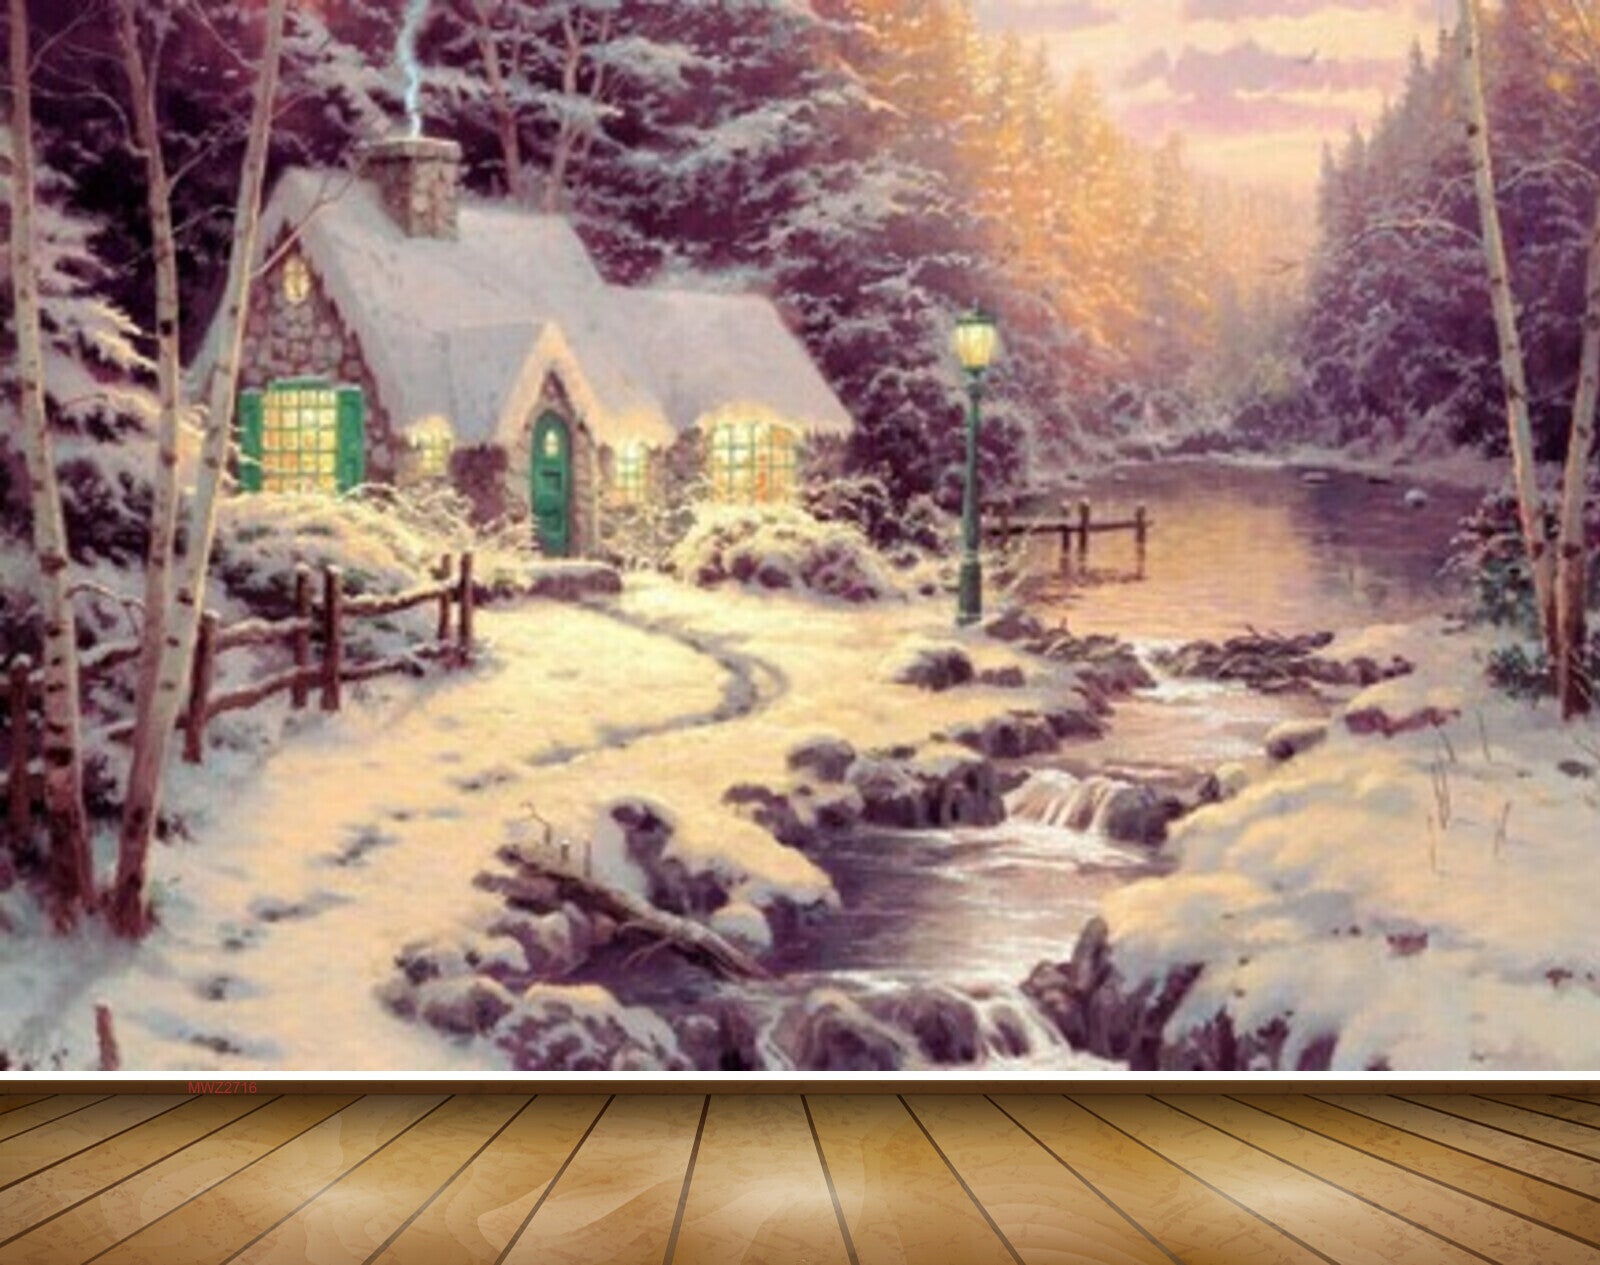 Avikalp MWZ2716 Houses Snows Trees River Pond Water Lamps Stones Painting HD Wallpaper